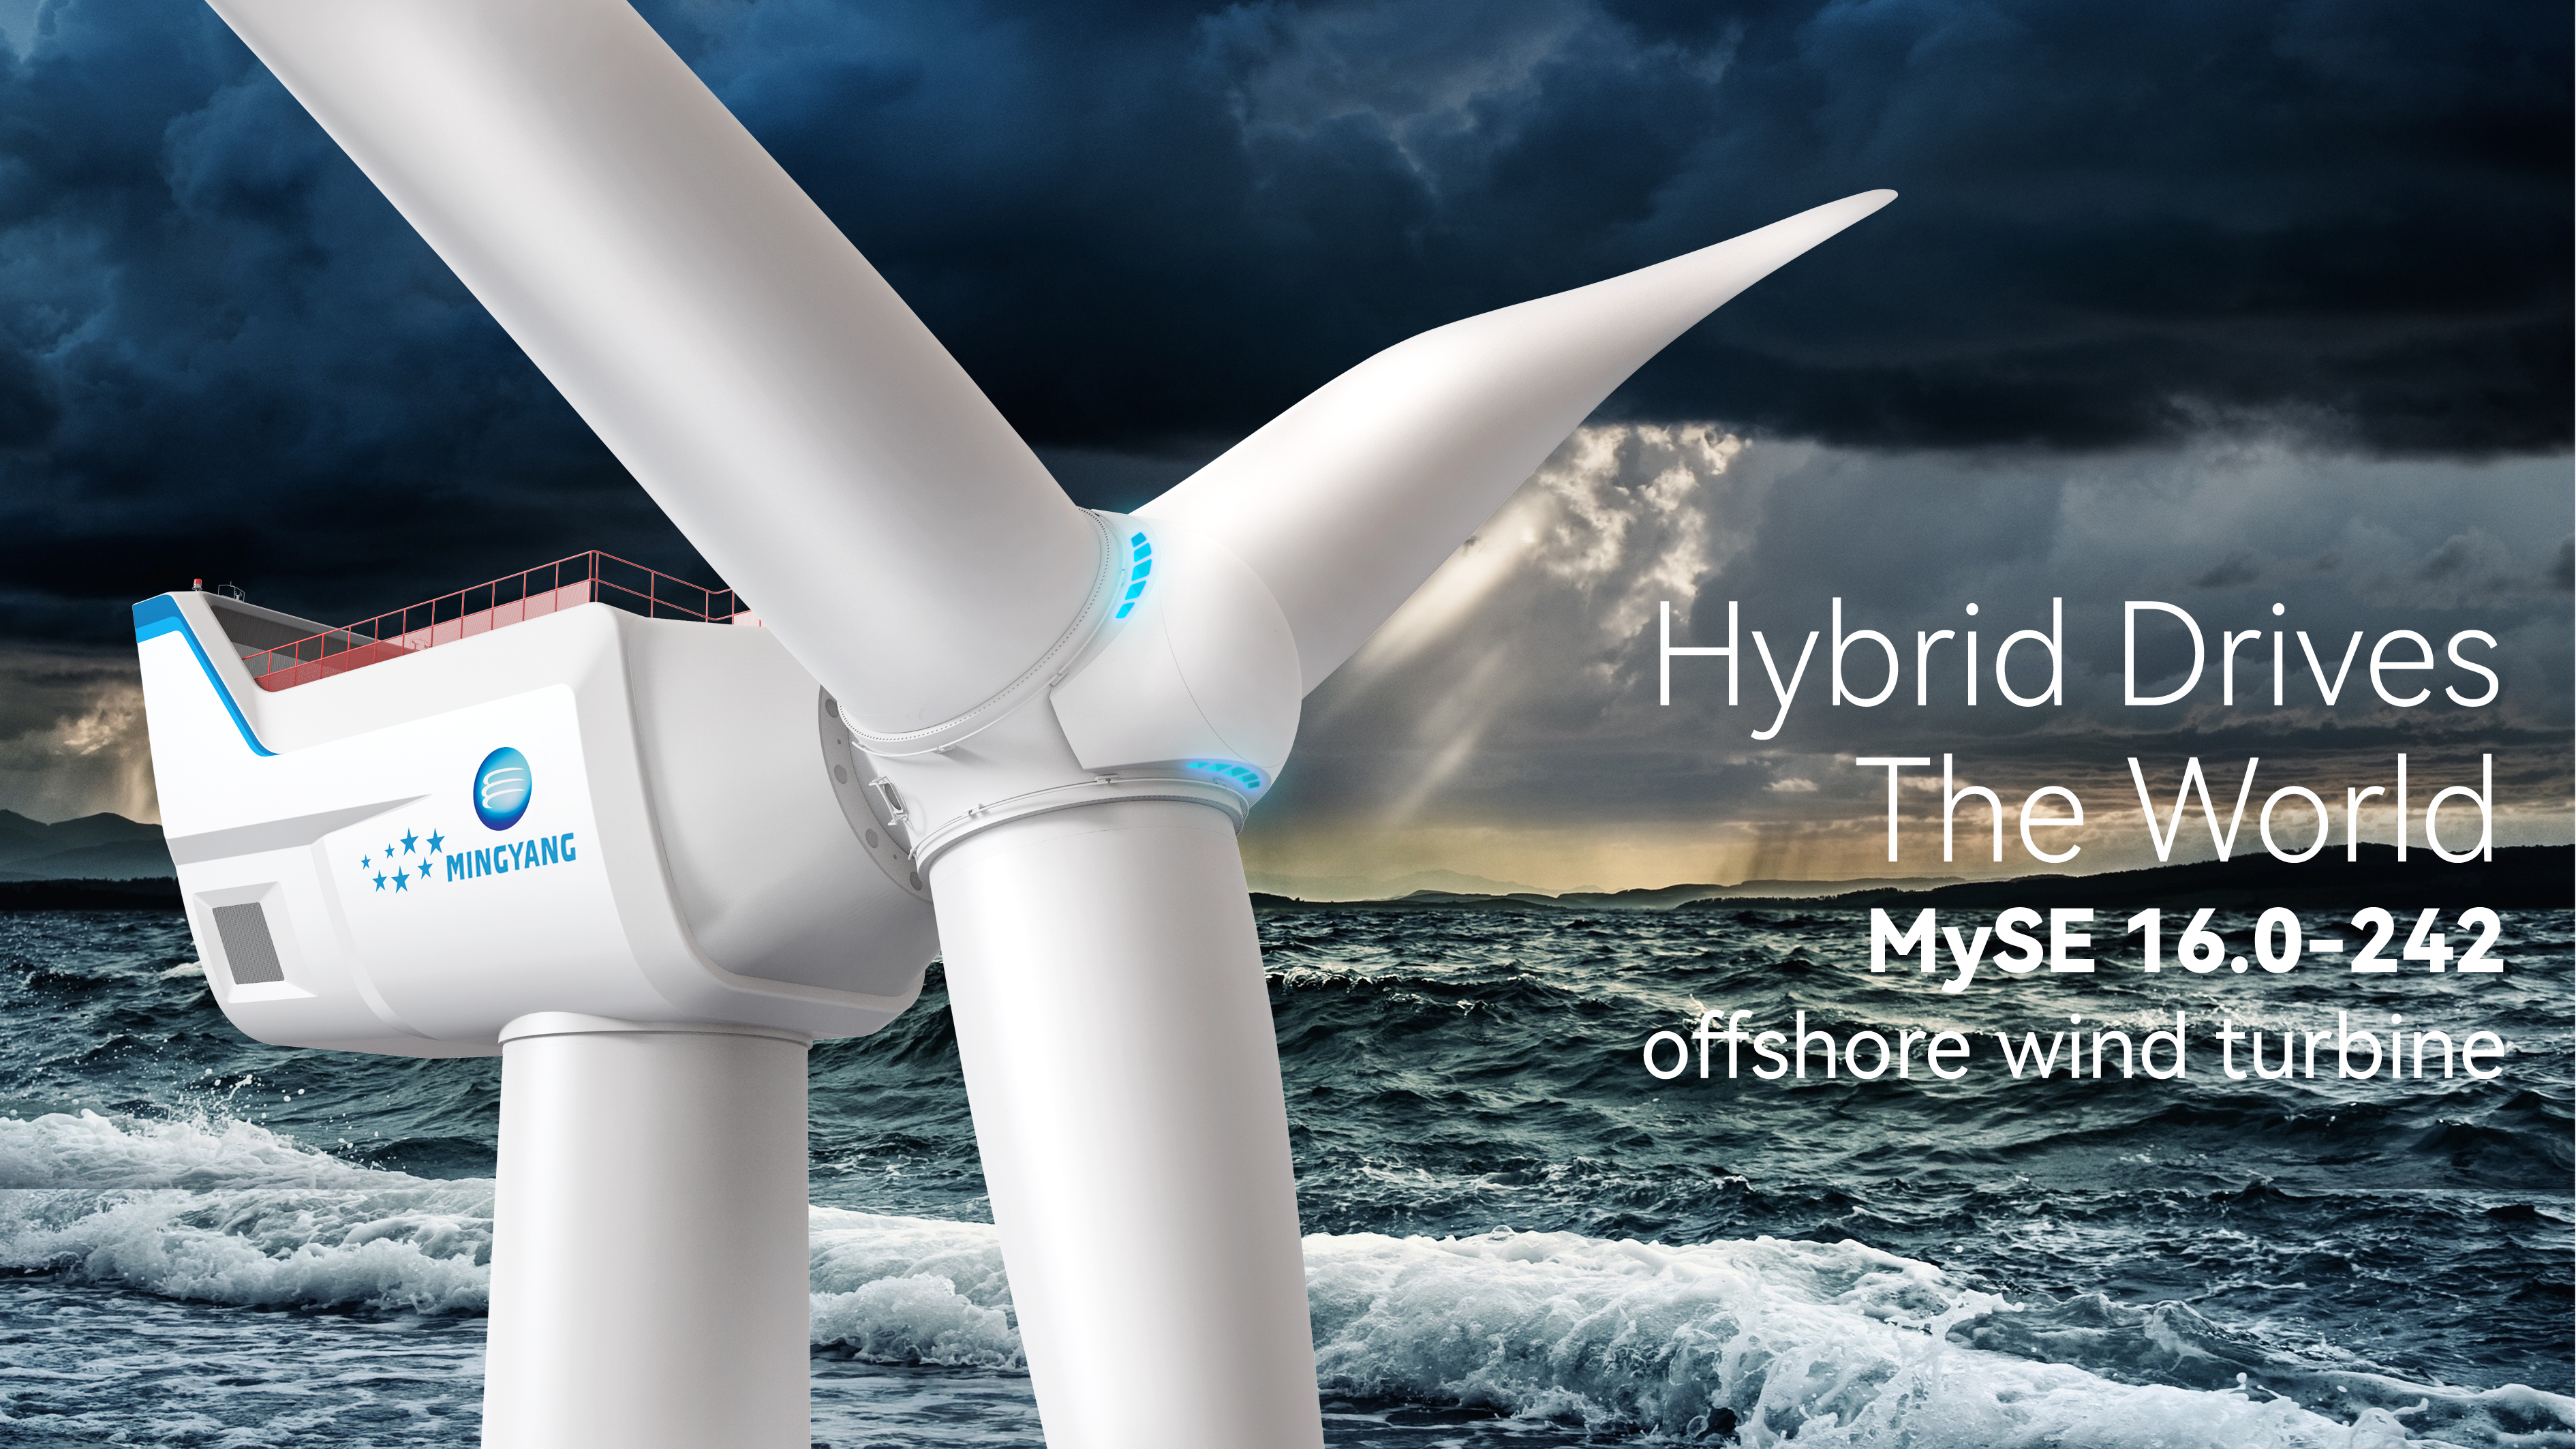 Leading innovation: MingYang Smart Energy launches MySE 16.0-242, the world’s largest offshore Hybrid Drive wind turbine